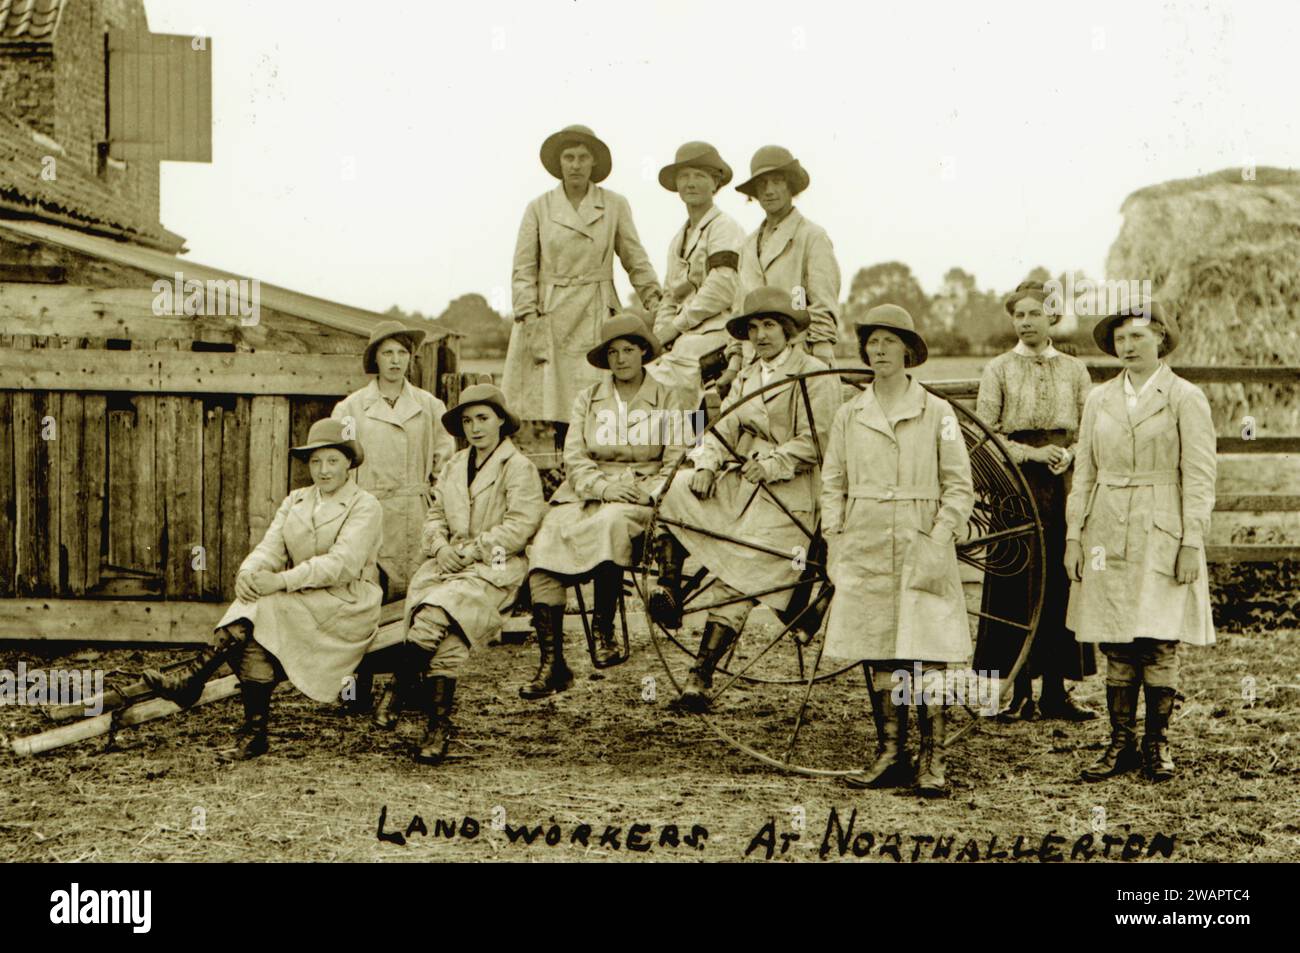 Print from a postcard of Landworkerrs at Northallerton, same lady in photo as training officer maybe, second on right Stock Photo